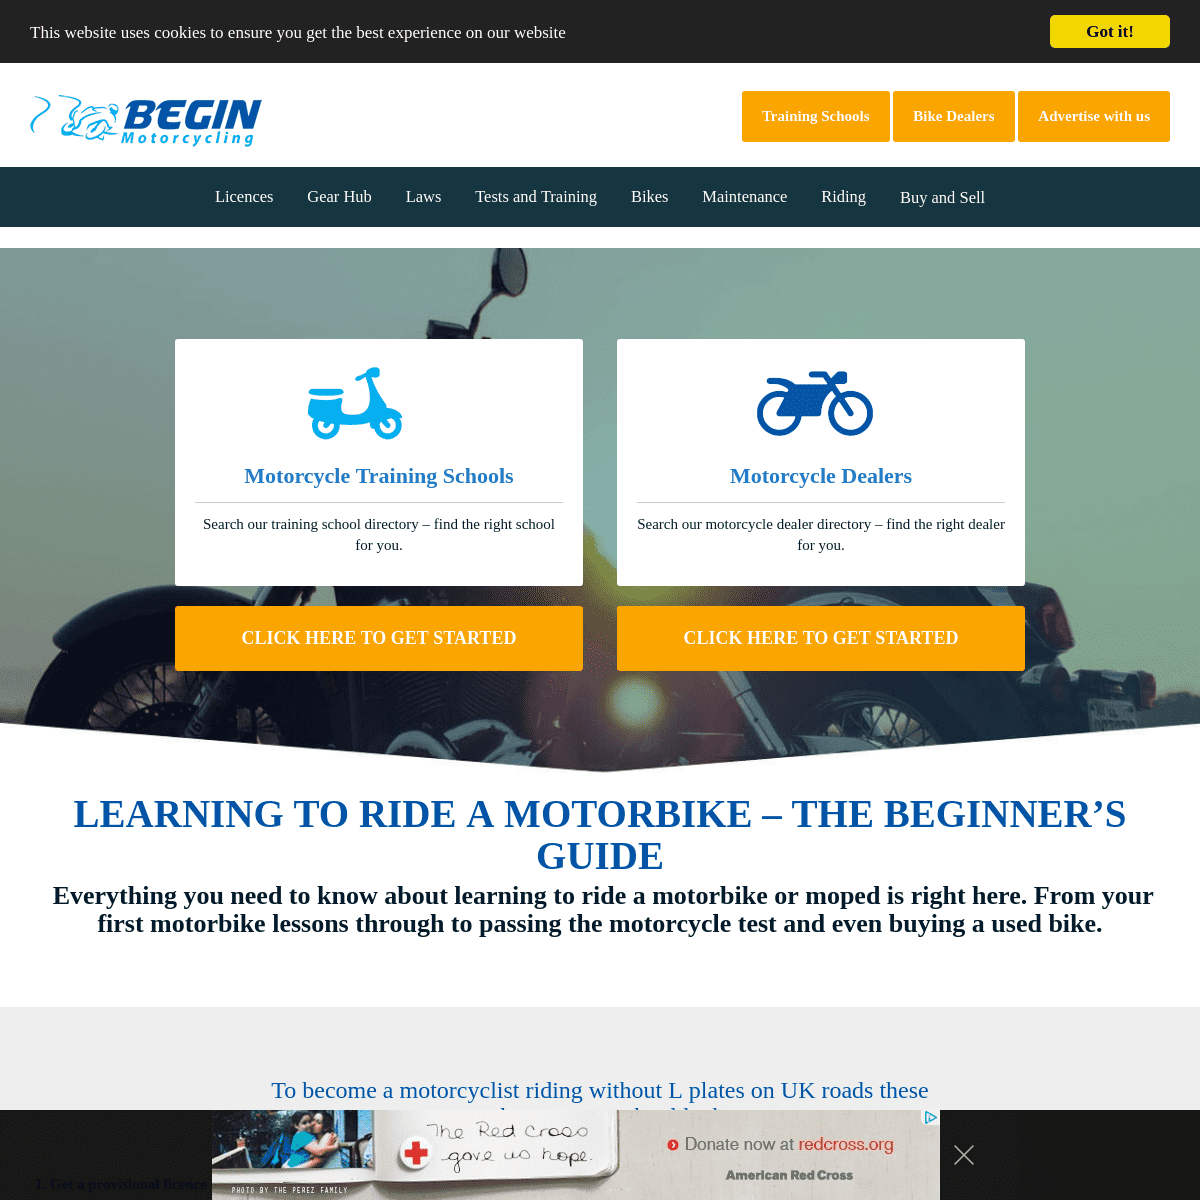 A complete backup of begin-motorcycling.co.uk